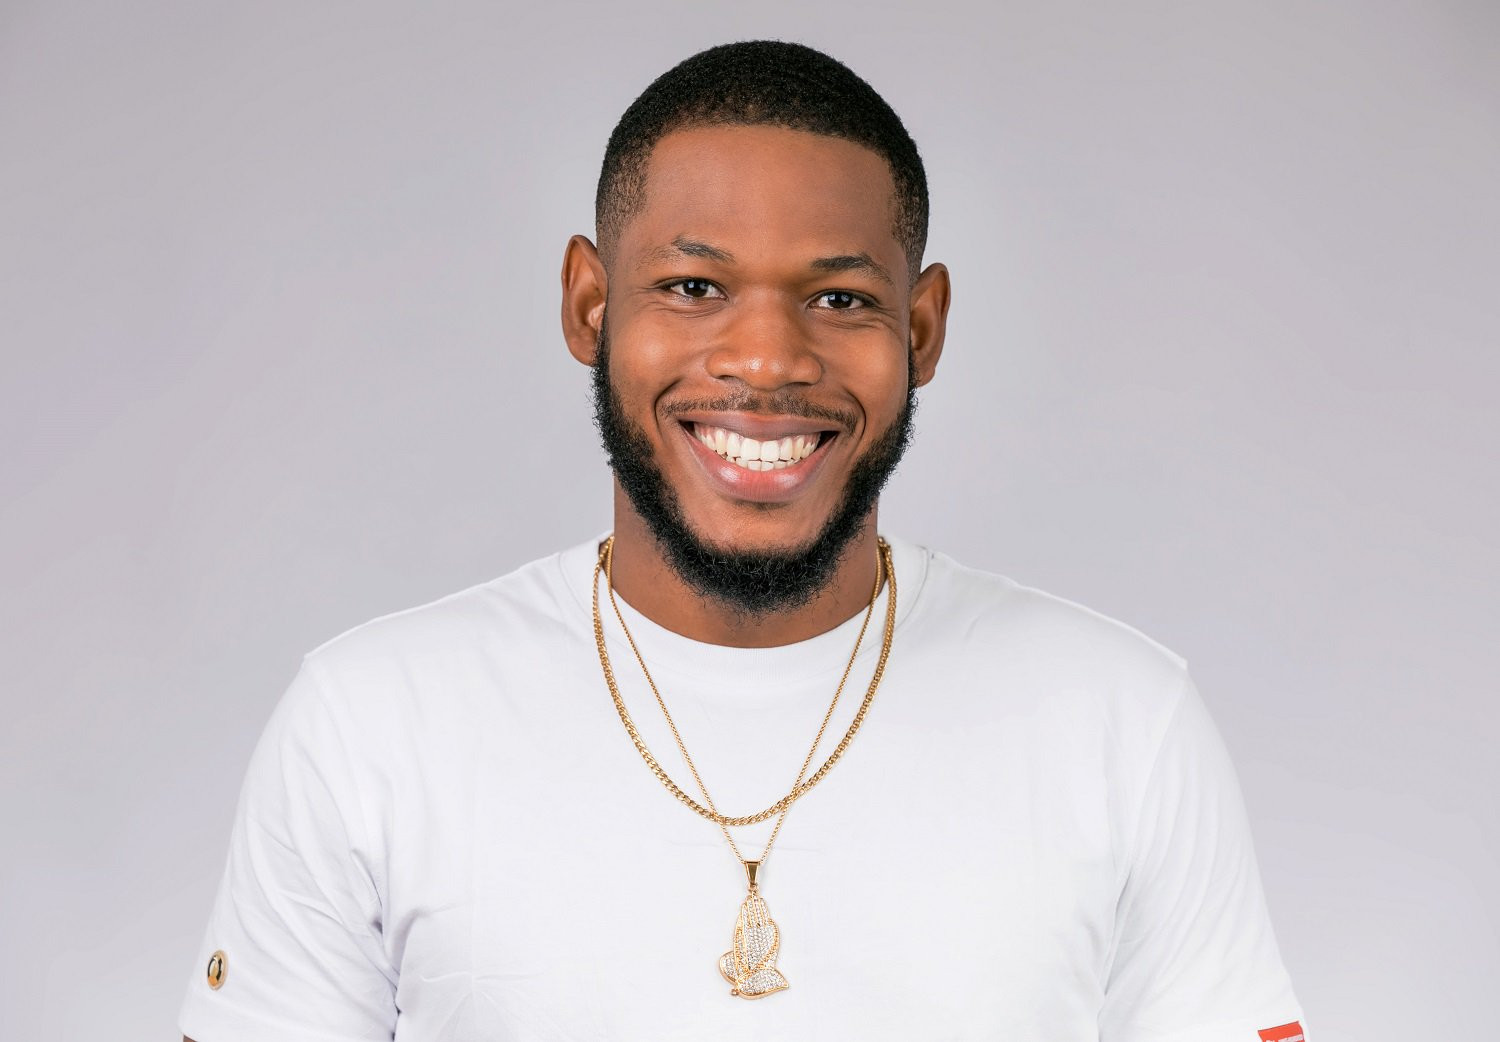 BBNaija?s Frodd starts up the year with a new house and car (video)